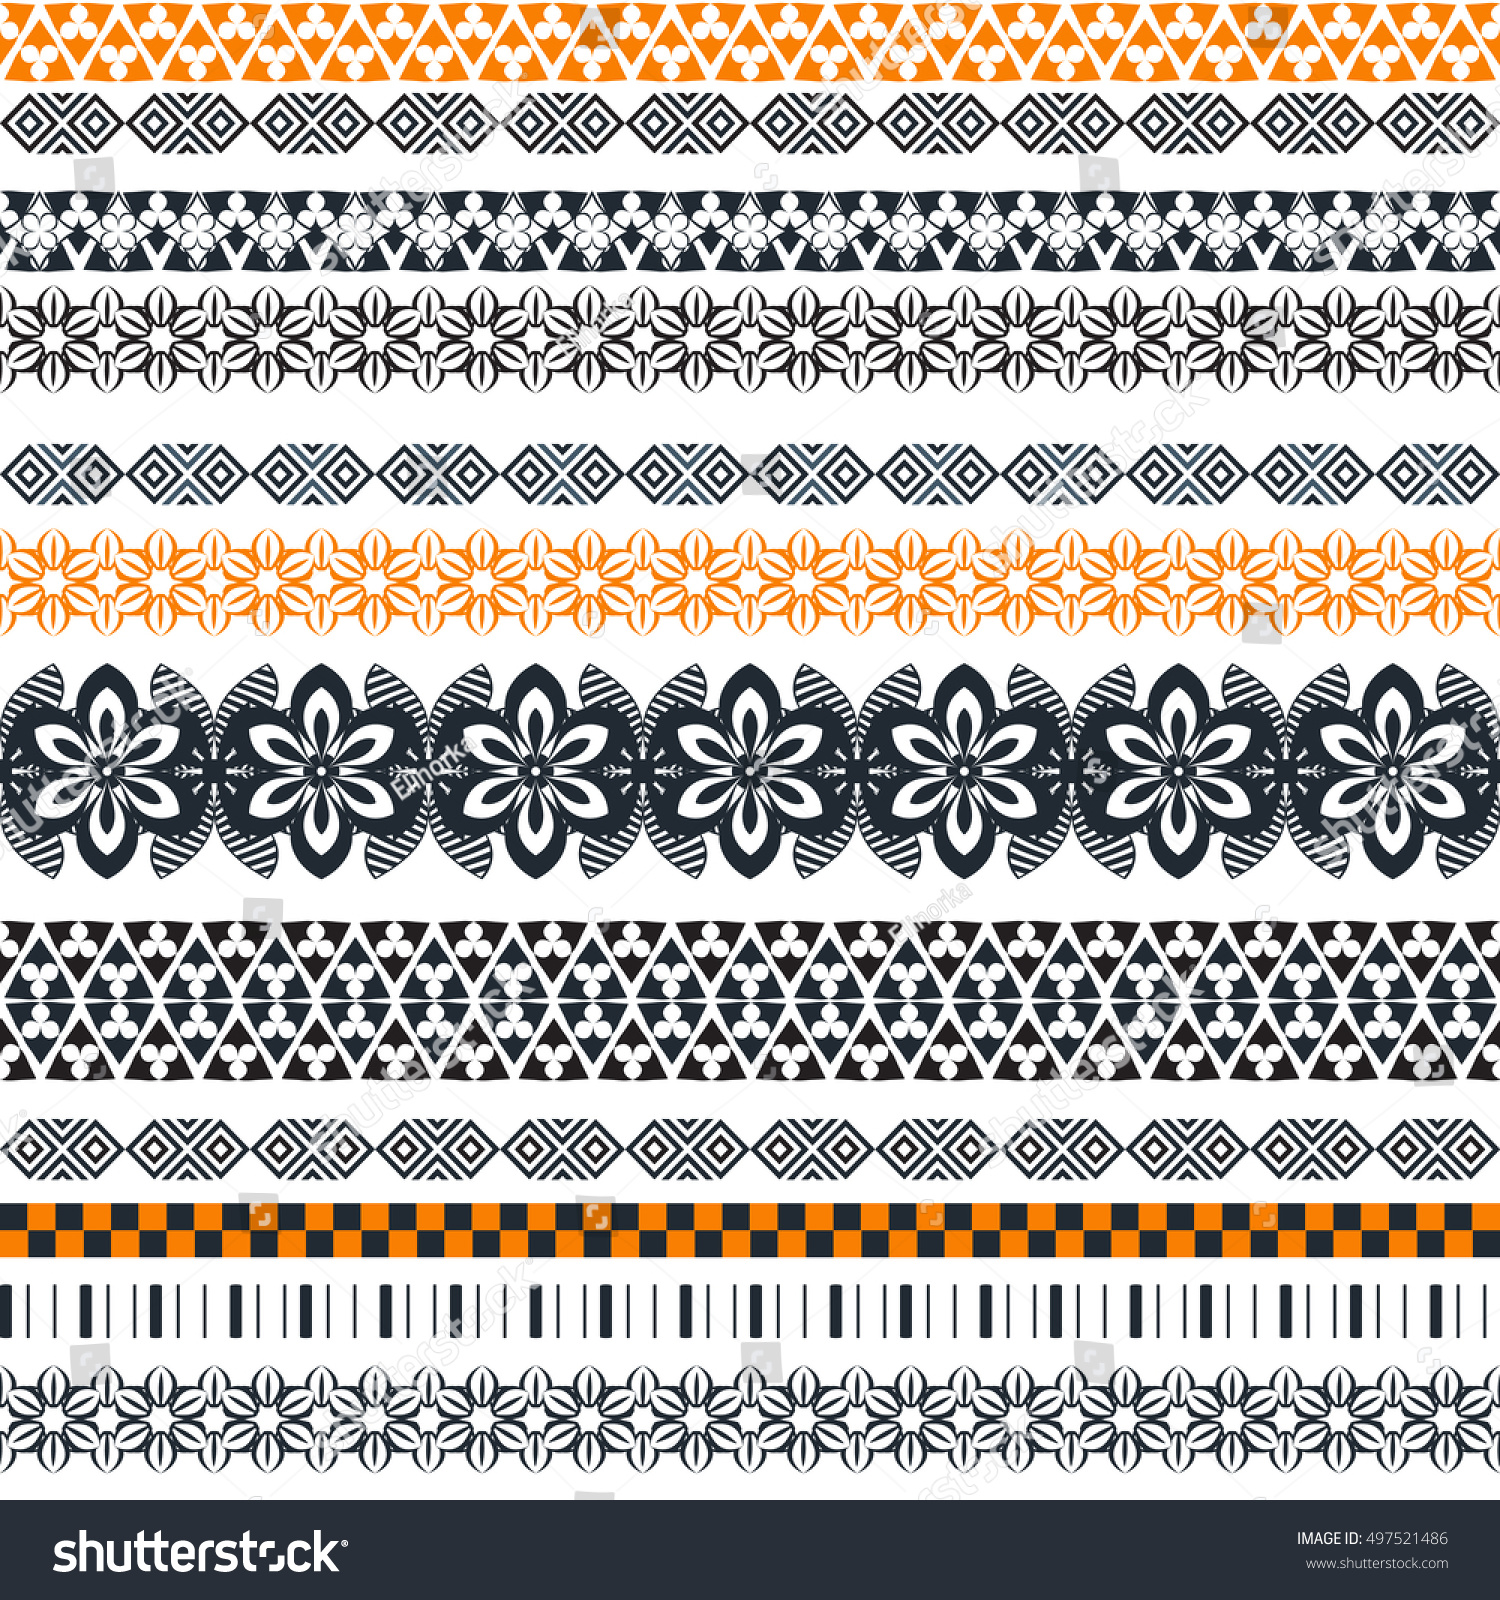 Tribal seamless pattern. Abstract background with ethnic ornament. Seamless background with different geometric shapes. Vector illustration #497521486